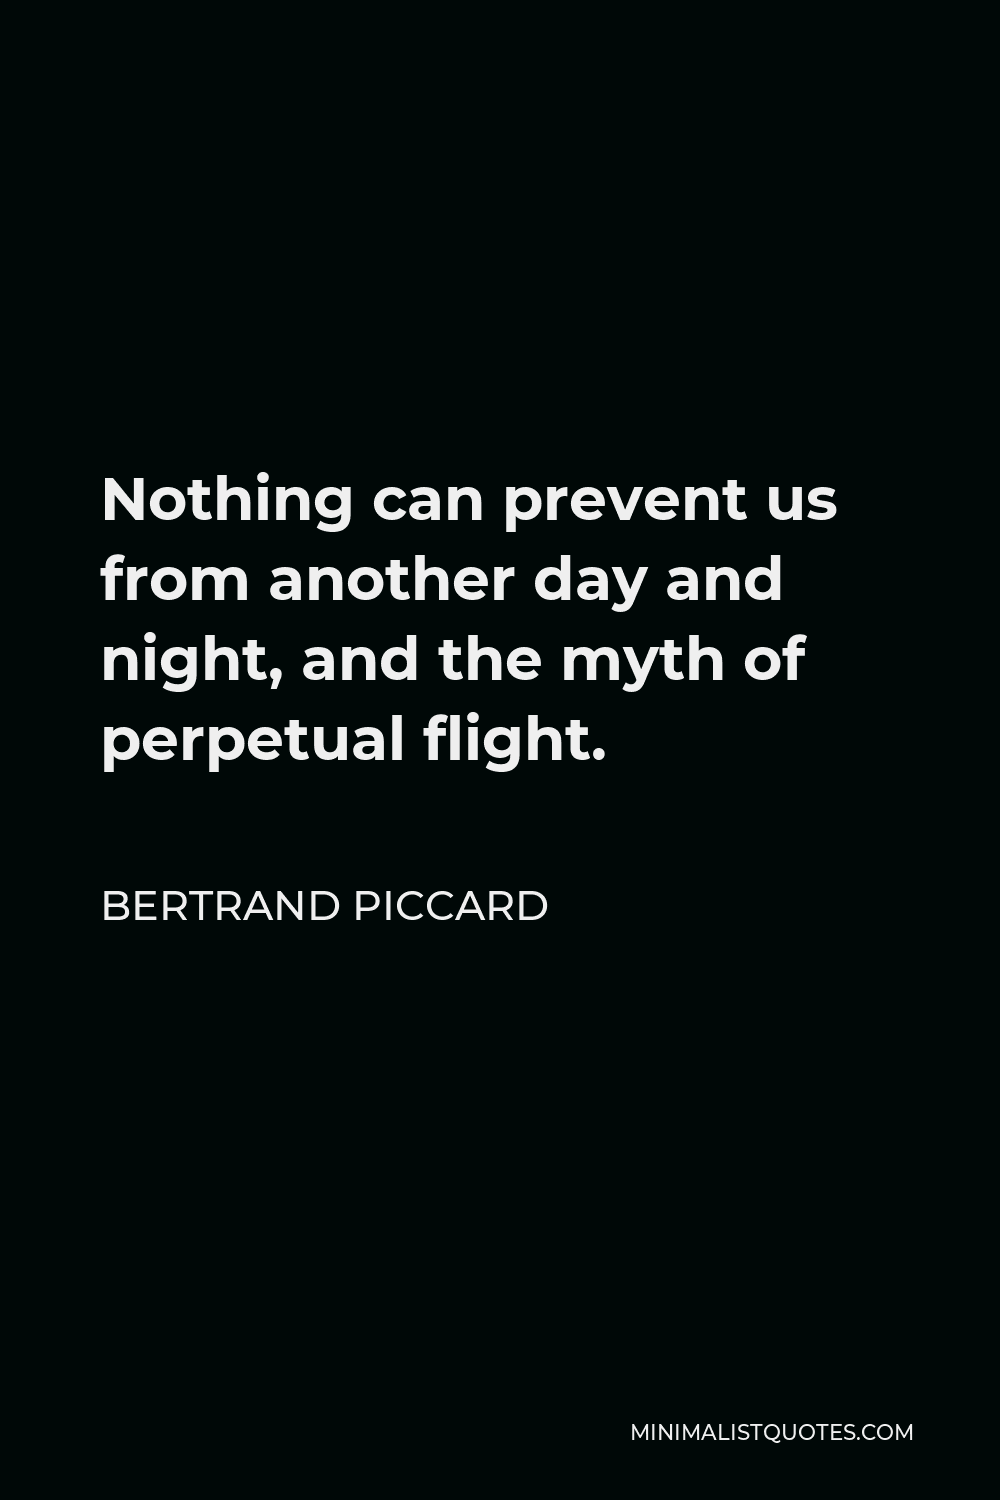 Bertrand Piccard Quote - Nothing can prevent us from another day and night, and the myth of perpetual flight.